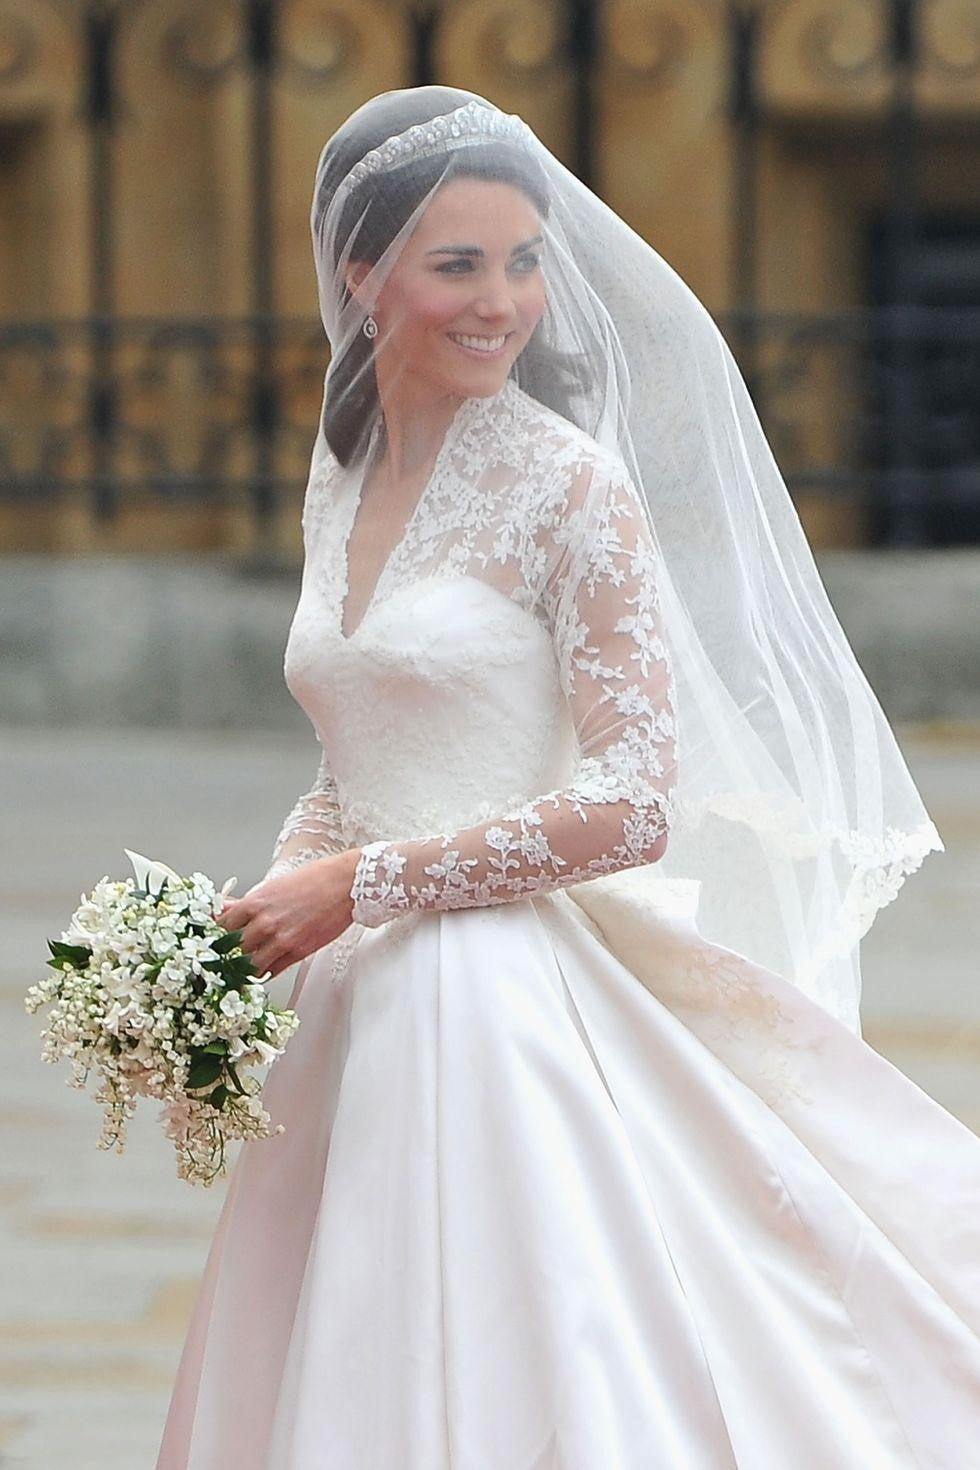 Kate Middleton Getty Images